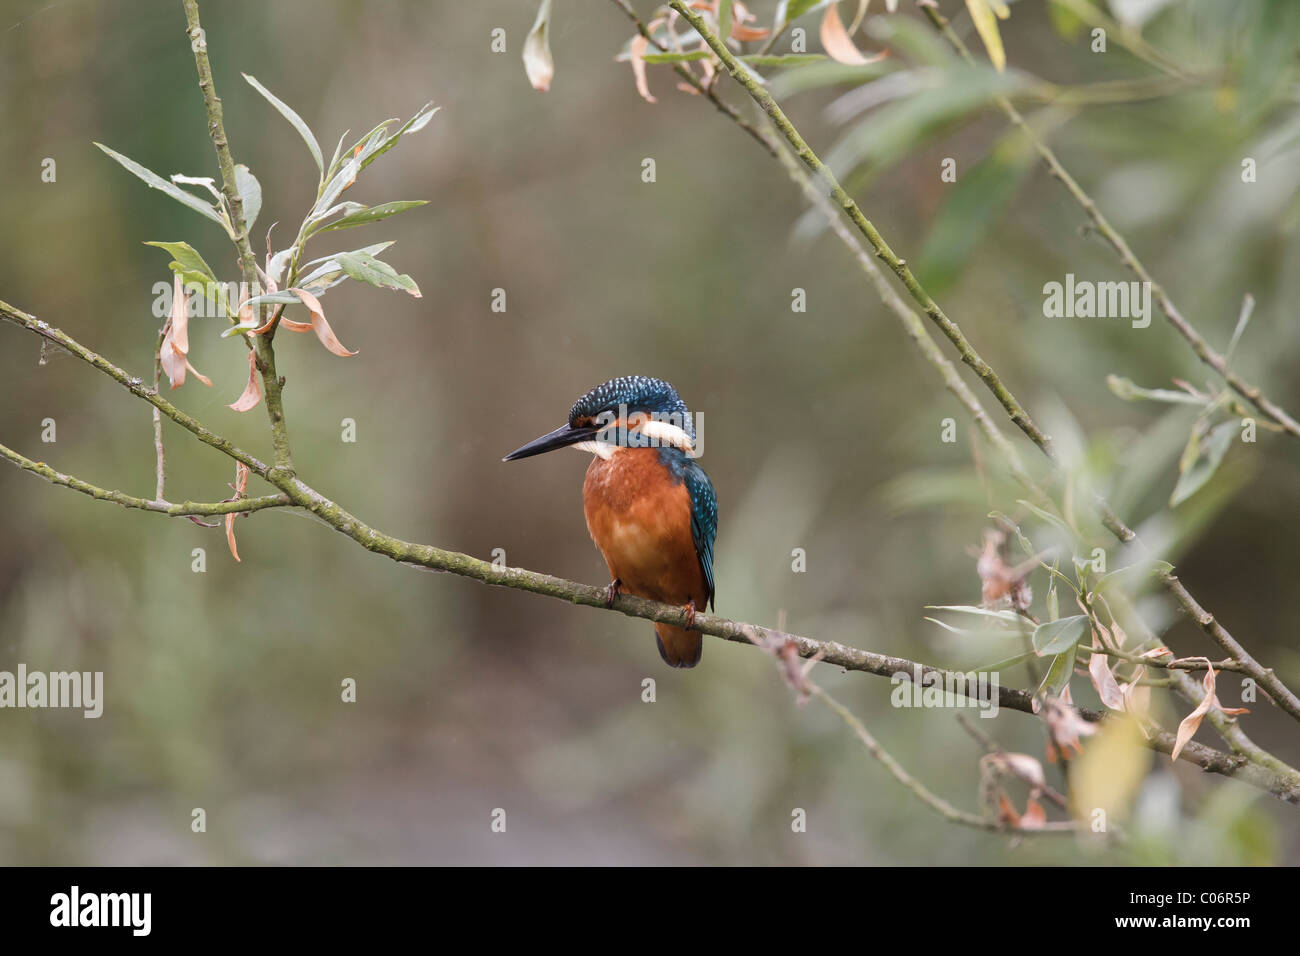 Kingfisher perched on the branch of a willow tree Stock Photo